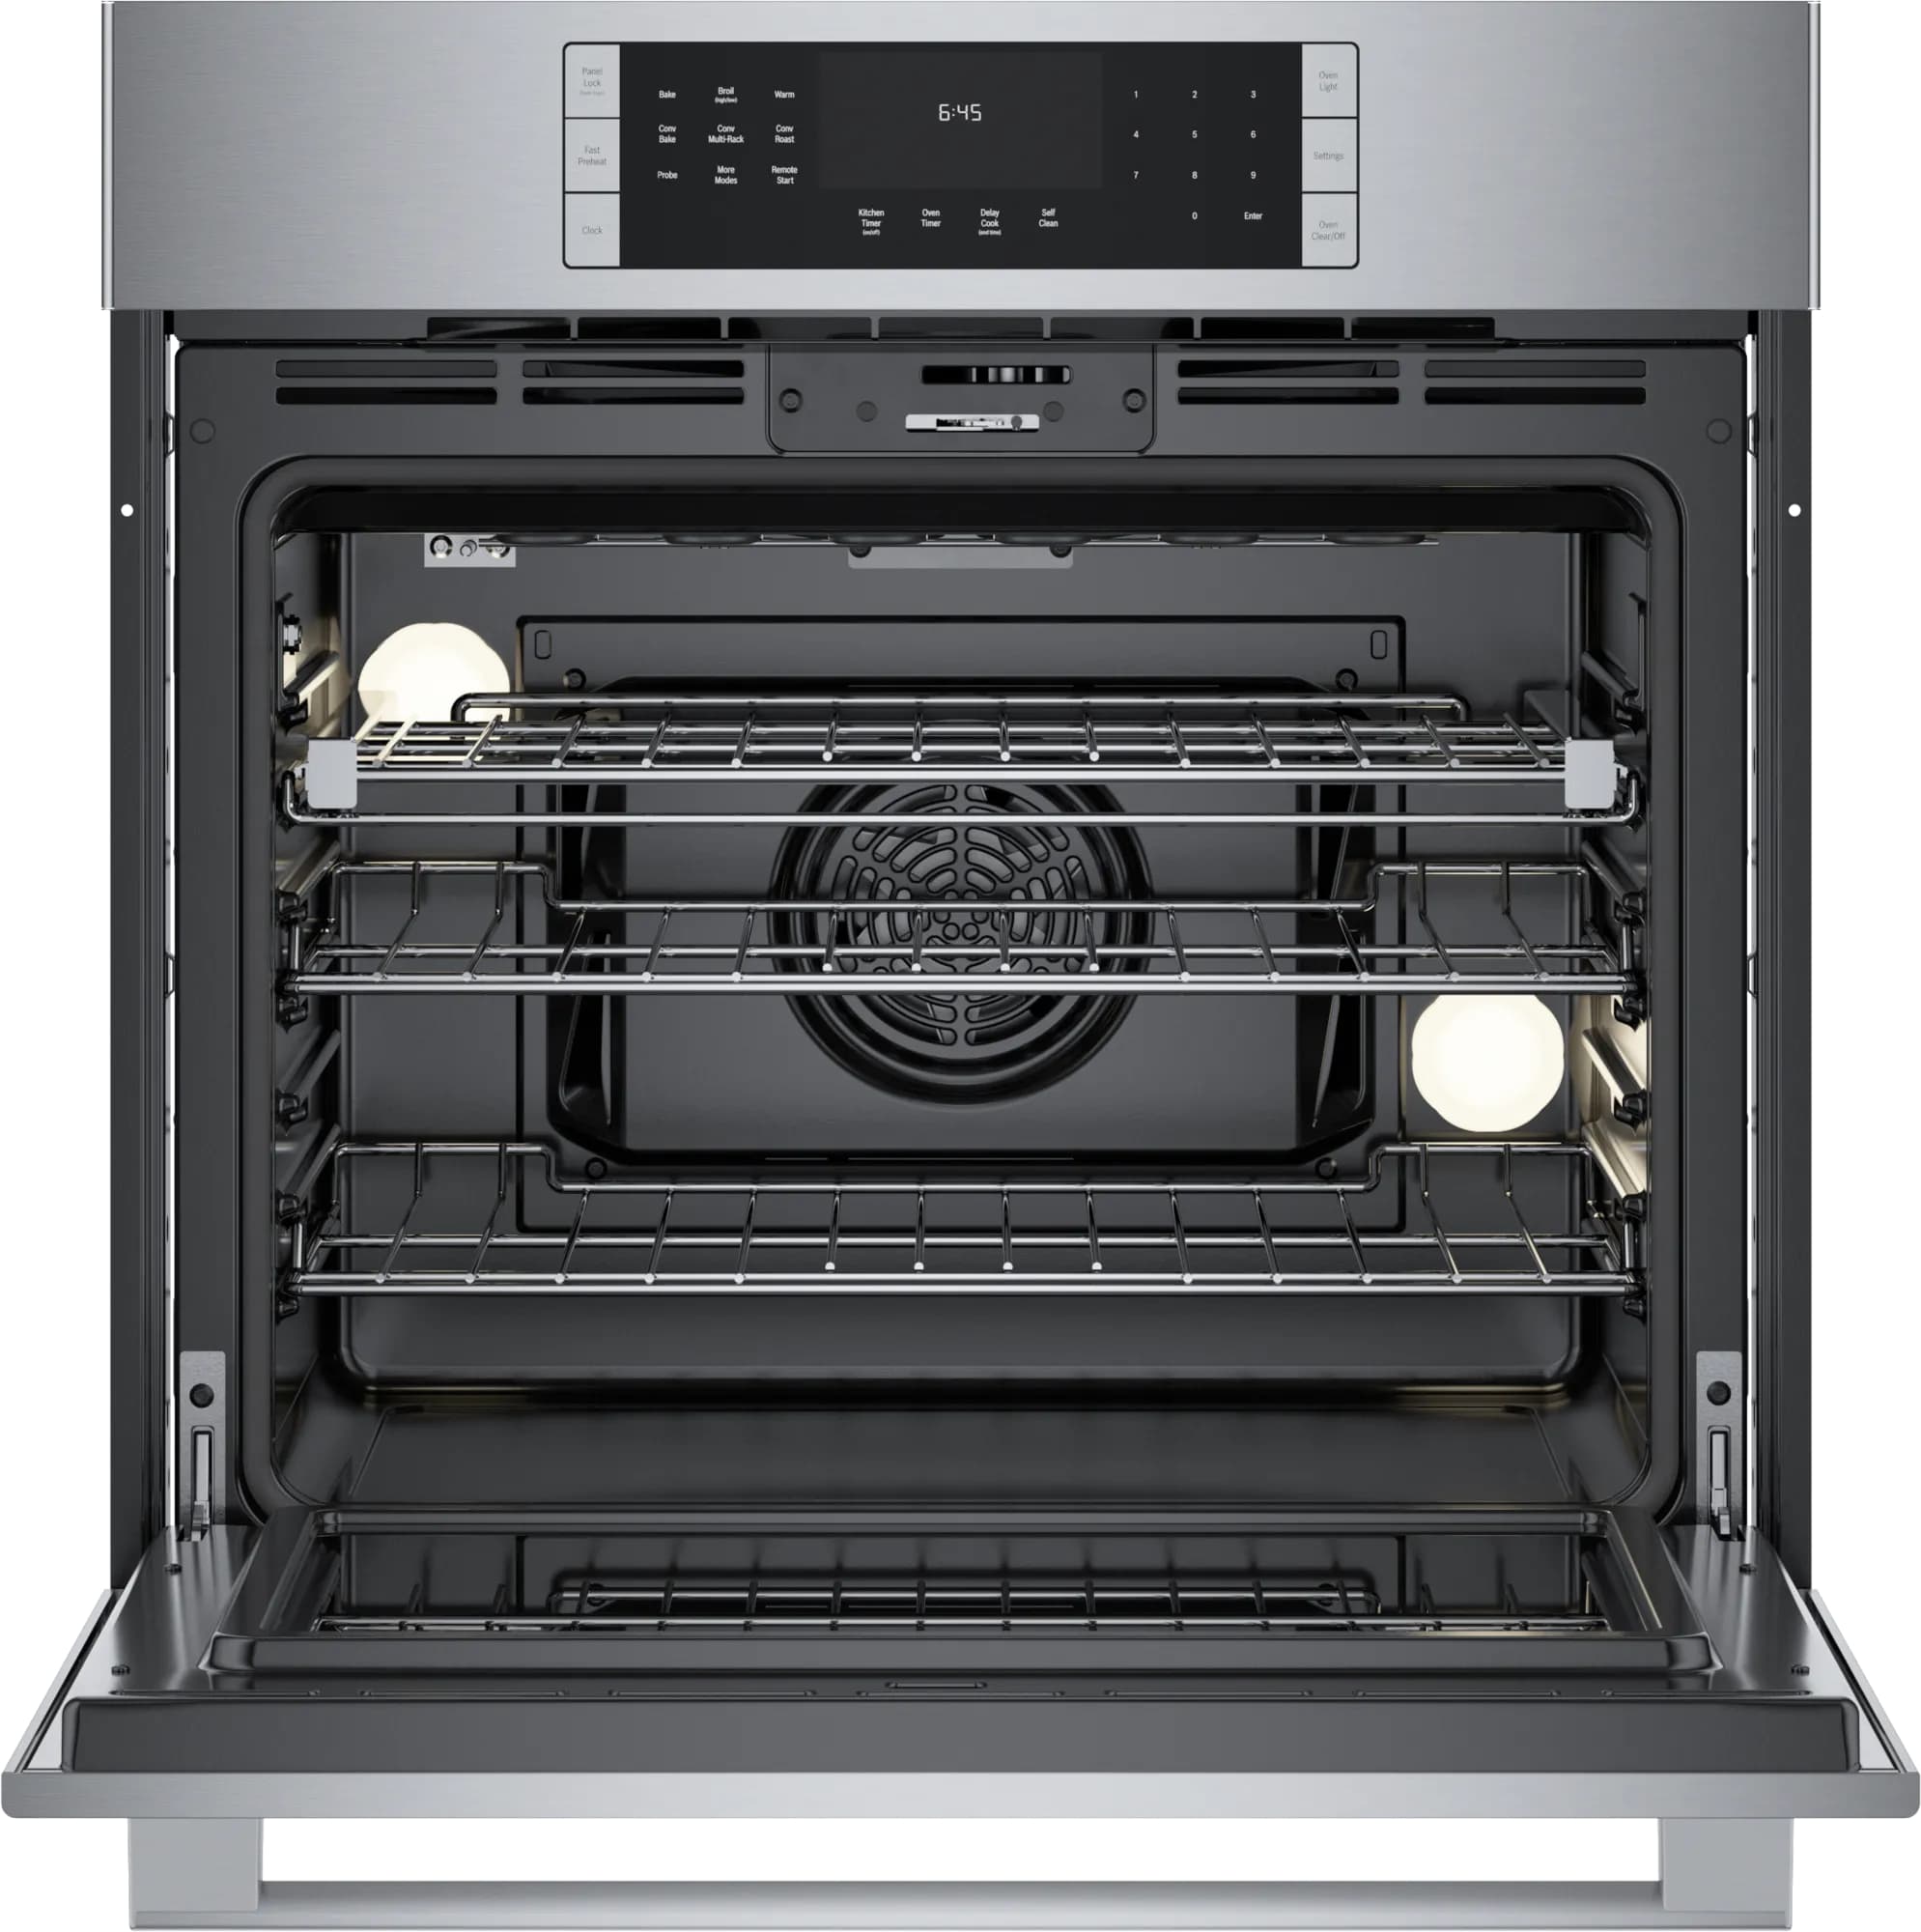 Bosch - 4.6 cu. ft Single Wall Oven in Stainless - HBL8454UC